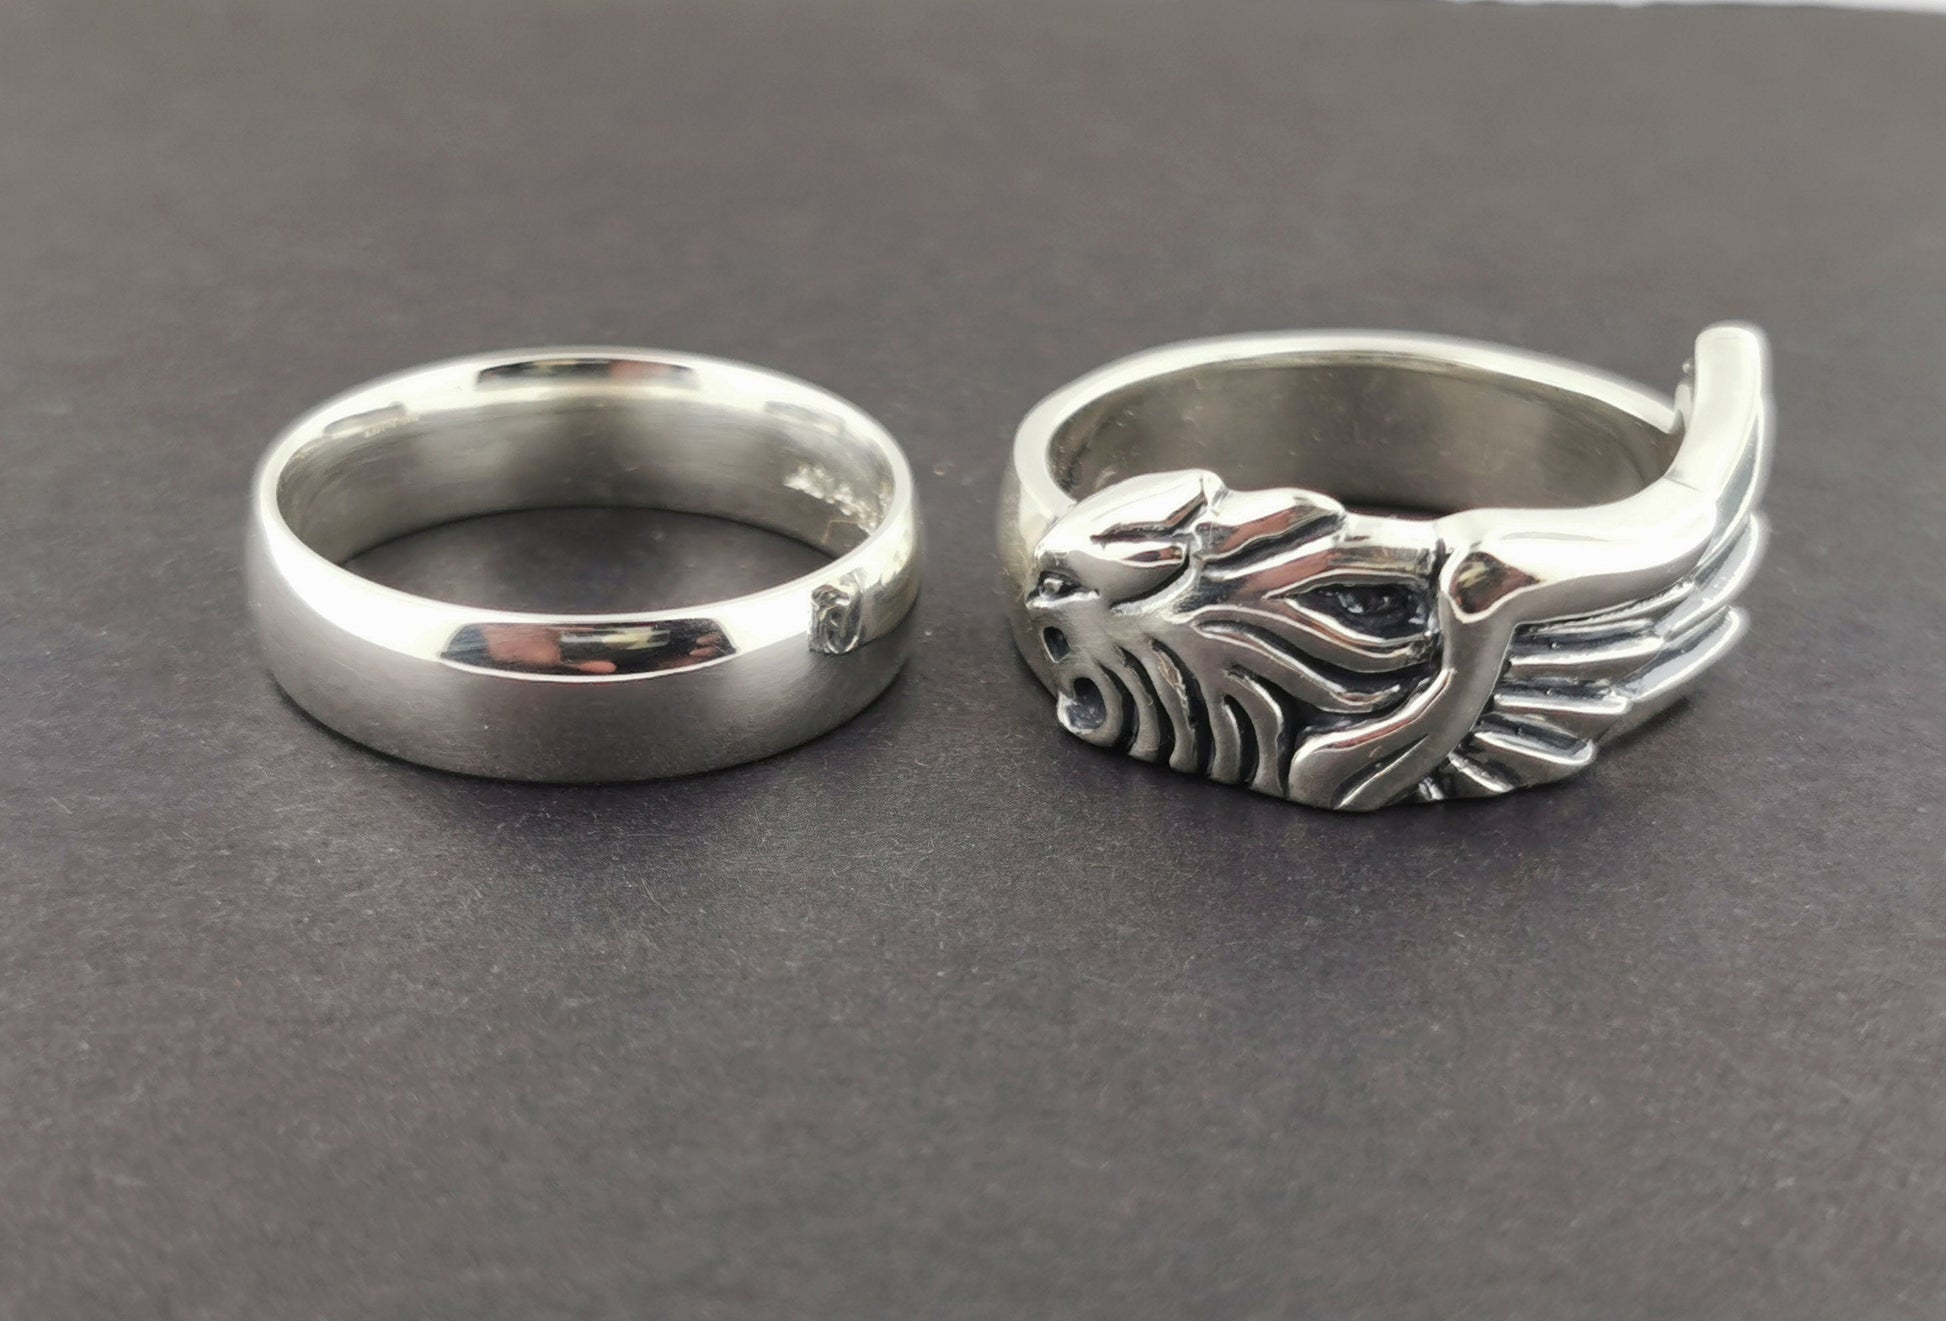 Final Fantasy 8 Squall Griever Rings, FF8 Sleeping Lion Heart Rings, FF88 Griever Ring Set, Final Fantasy Jewelry, Final Fantasy Rings, Final Fantasy 8 Rings, Griever Ring Set, Final Fantasy Jewelry, FF8 Wedding Rings, Final Fantasy Wedding Rings